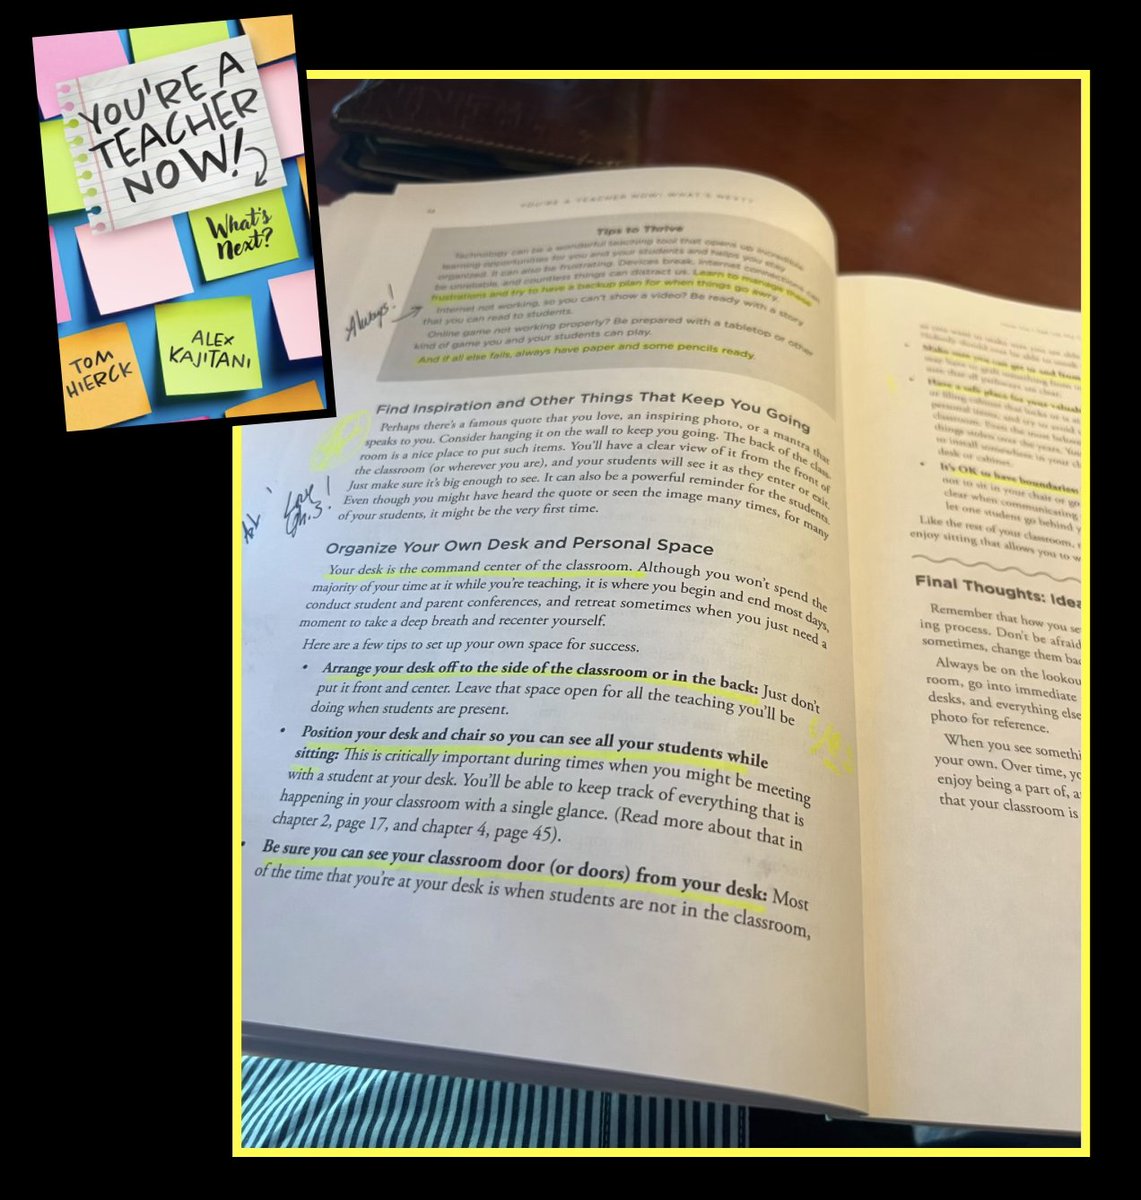 When @BCSMasterChief breaks out the highlighter this often, you can't but feel that you and your co-author (@AlexKajitani) may have crafted a great book. Get your copy today and support a new teacher @technolandy @saskedchat @bcedchat @Super_Halton @RhaeAnnH @BTPS28 @nlpsab